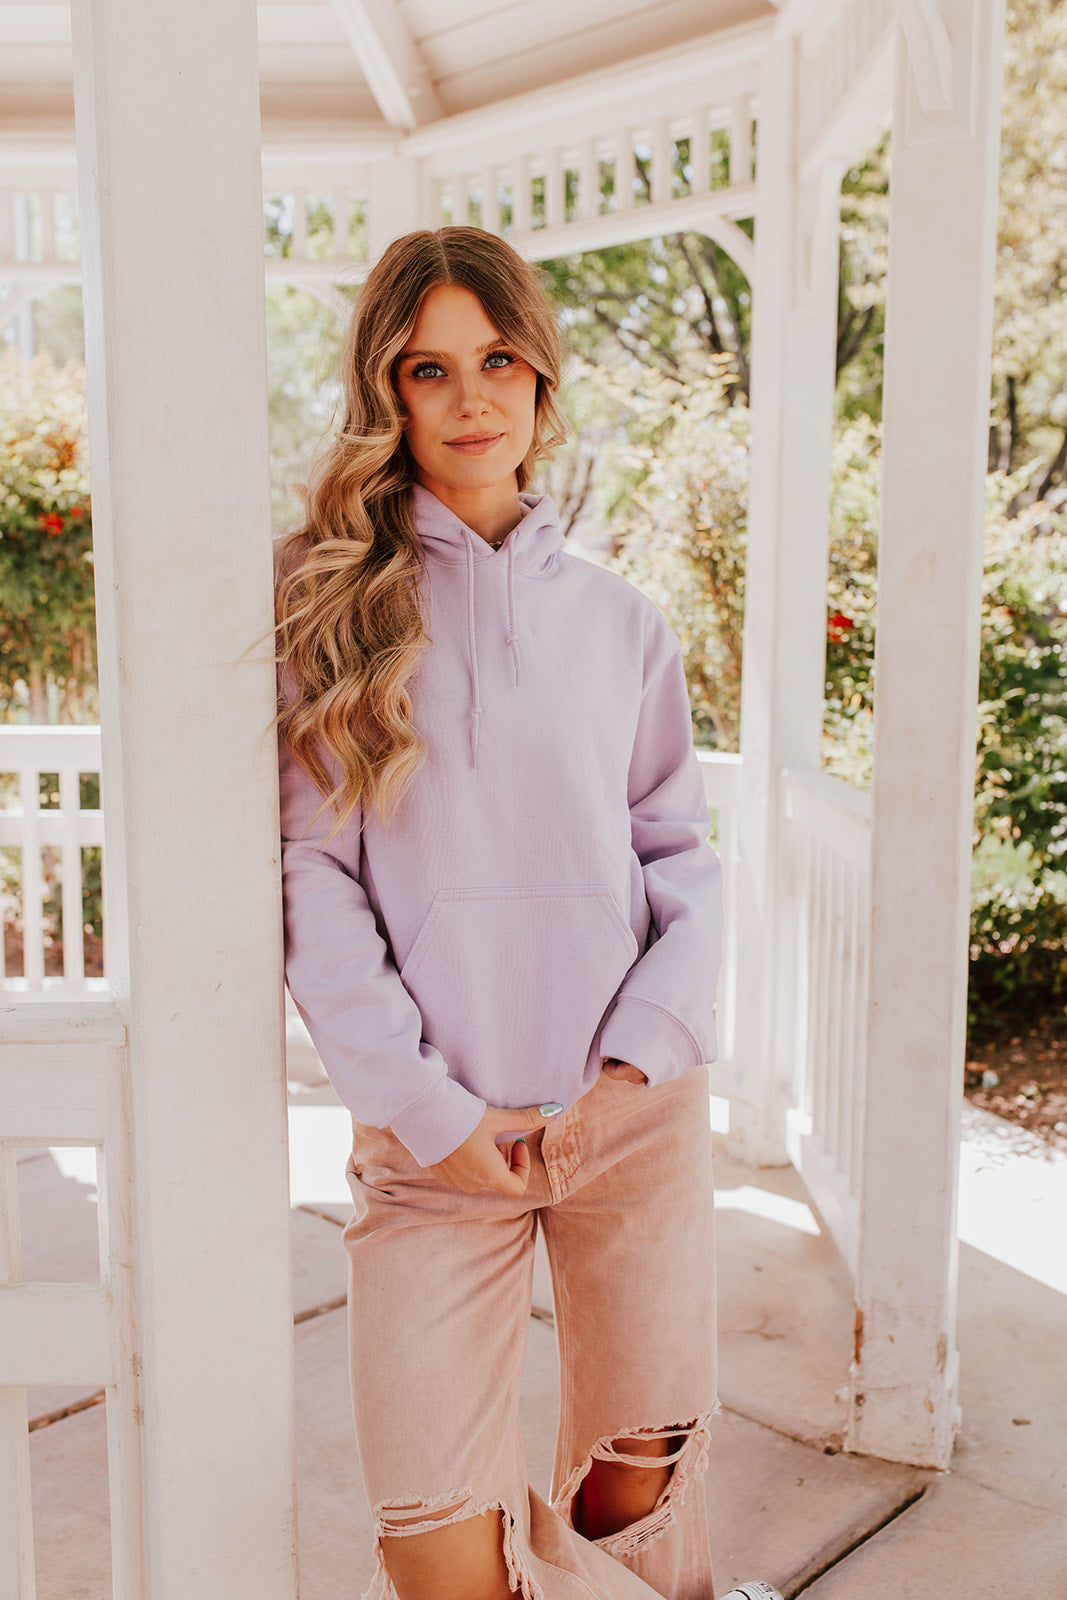 THE LET HER FLY BUTTERFLY HOODIE IN LAVENDER BY PINK DESERT